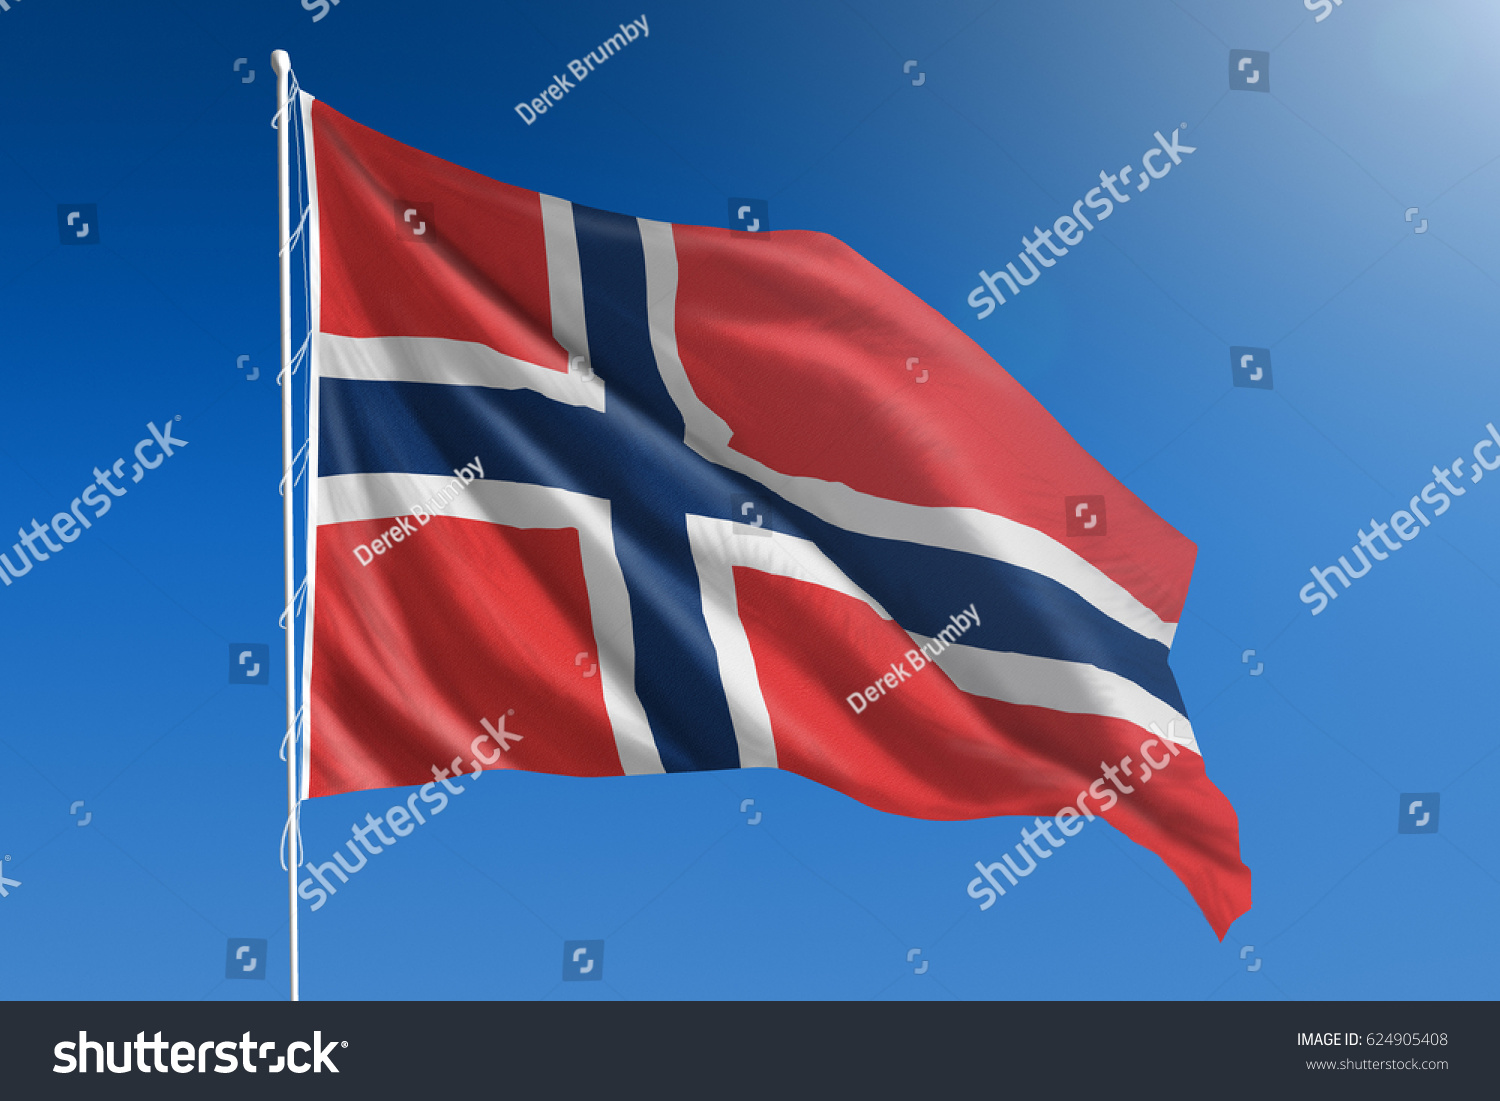 The National flag of Norway blowing in the wind in front of a clear blue sky #624905408